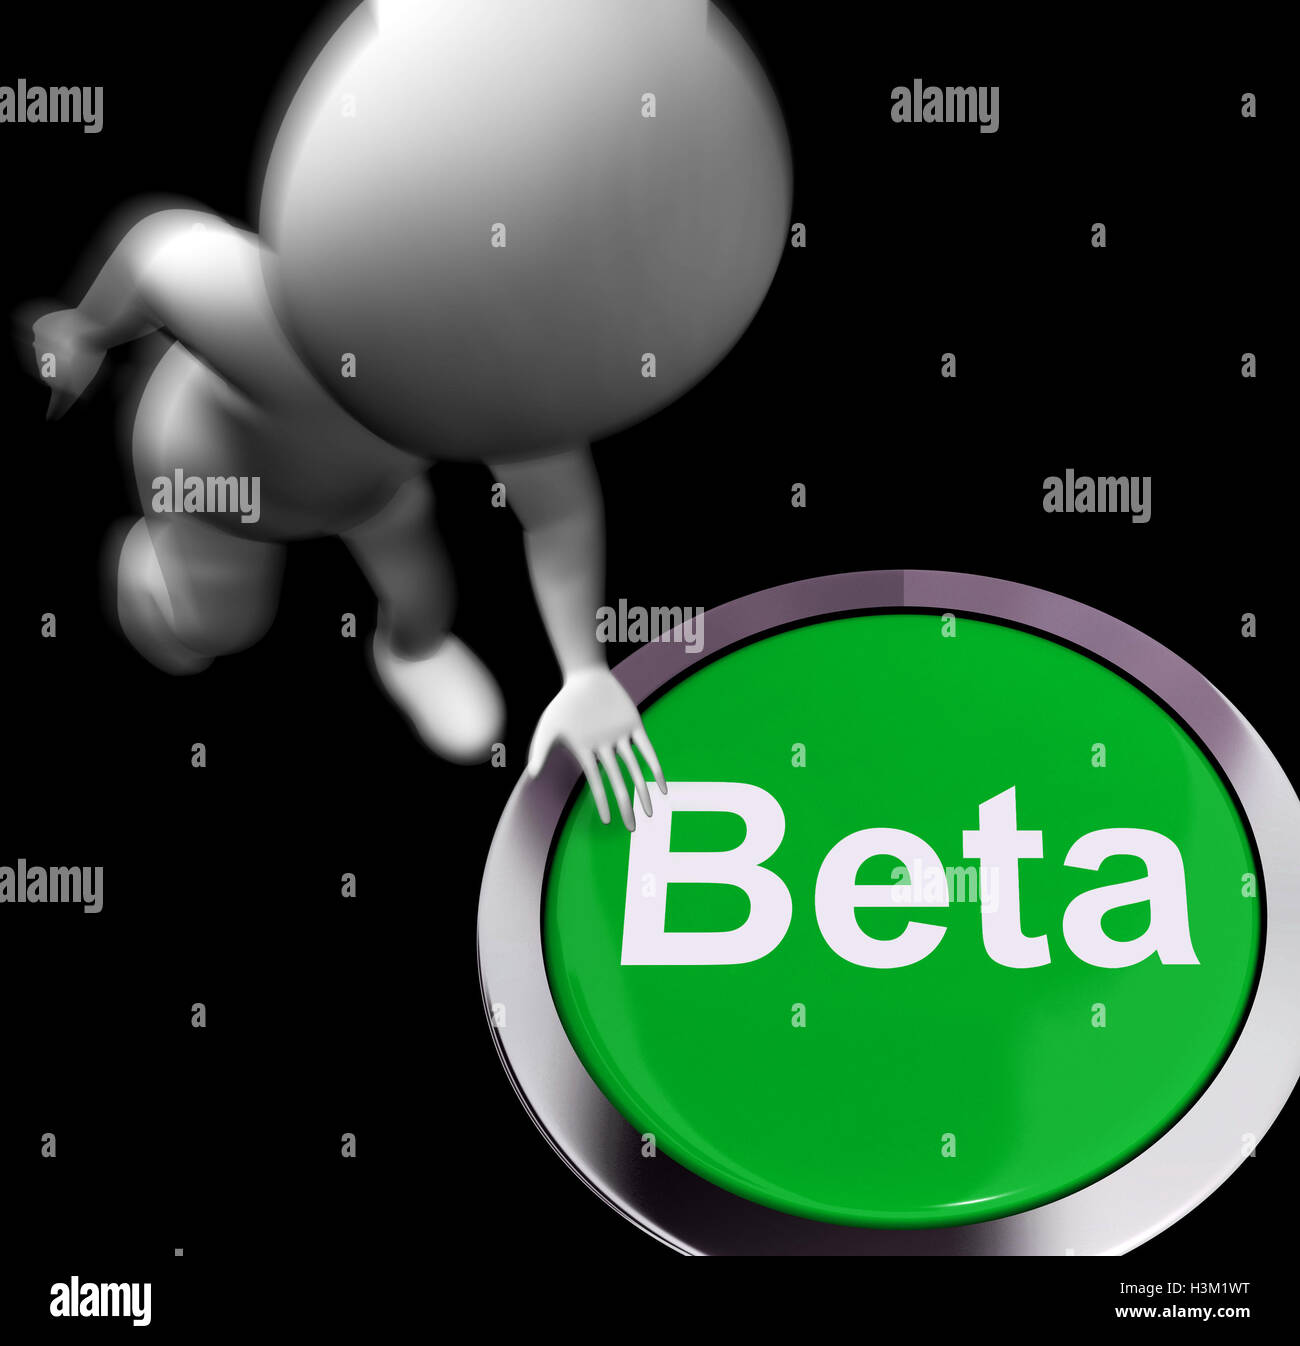 Beta Pressed Shows Software Testing And Development Stock Photo